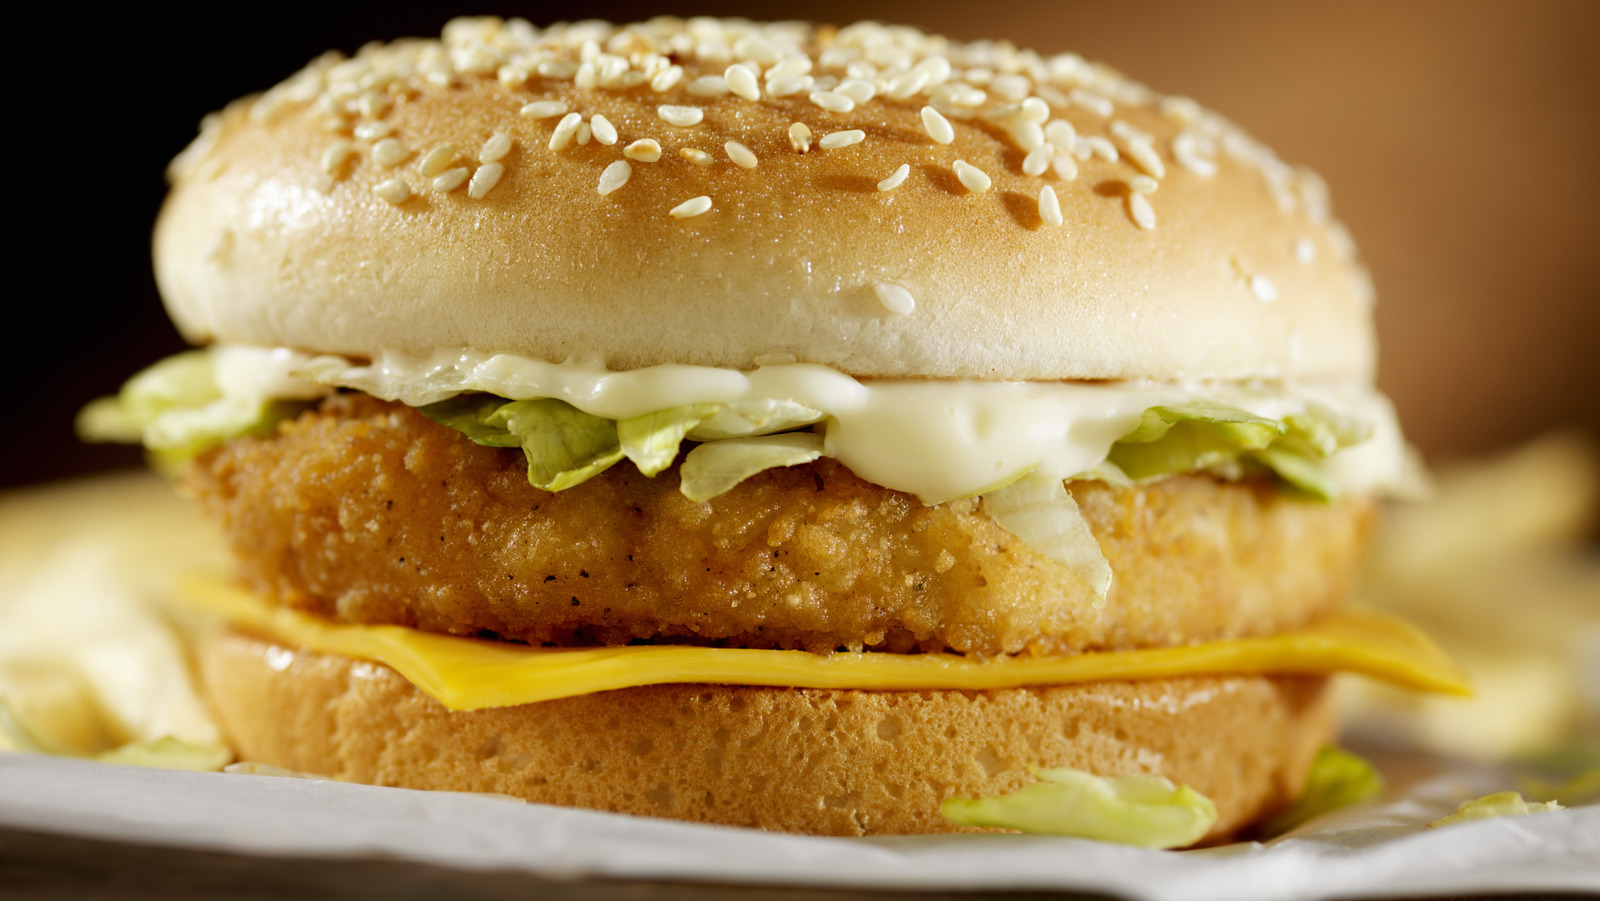 Classic Chicken Patties - 80 oz. - Products - Foster Farms